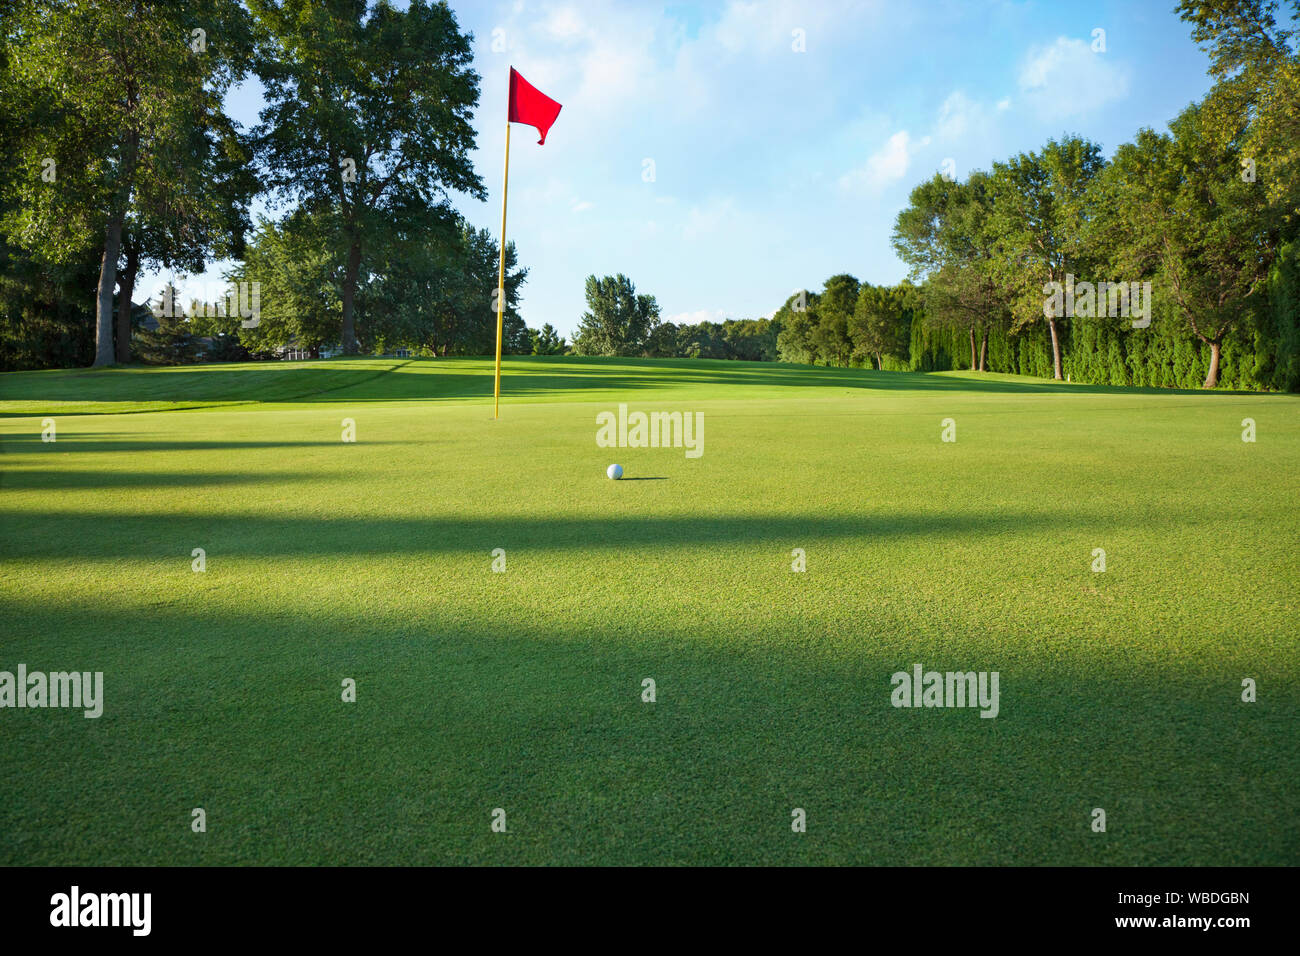 Low angle view of a golf green with red flag and ball on a sunny afternoon Stock Photo